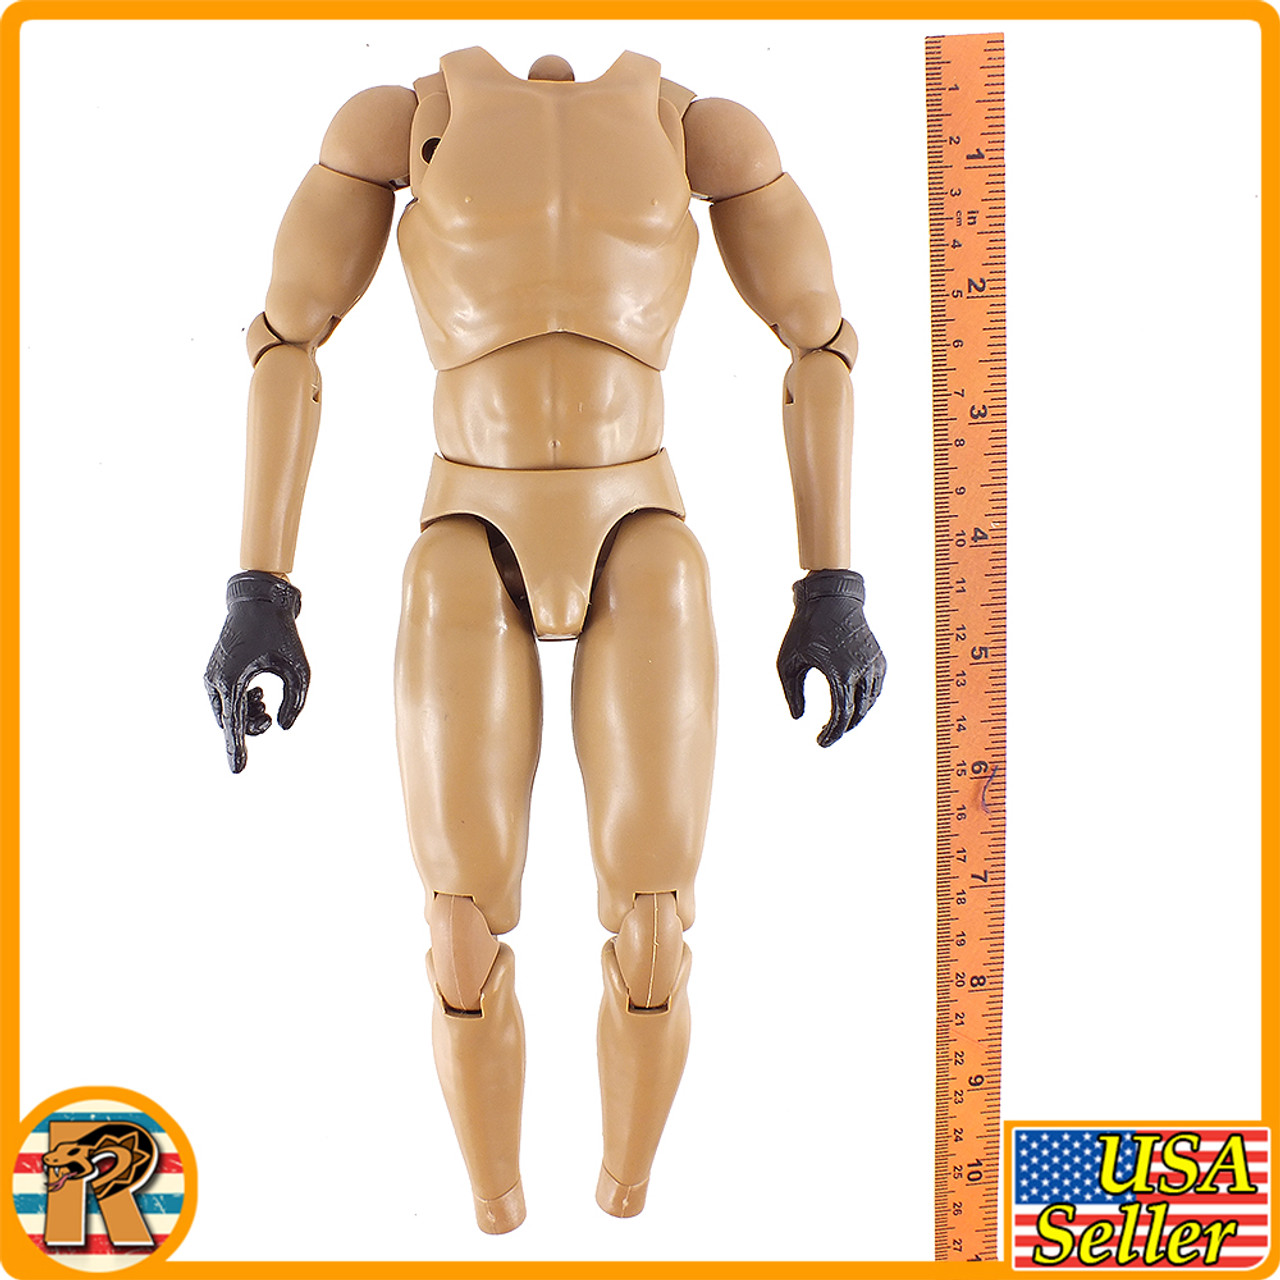 MT China SWAT - Nude Body - 1/6 Scale -